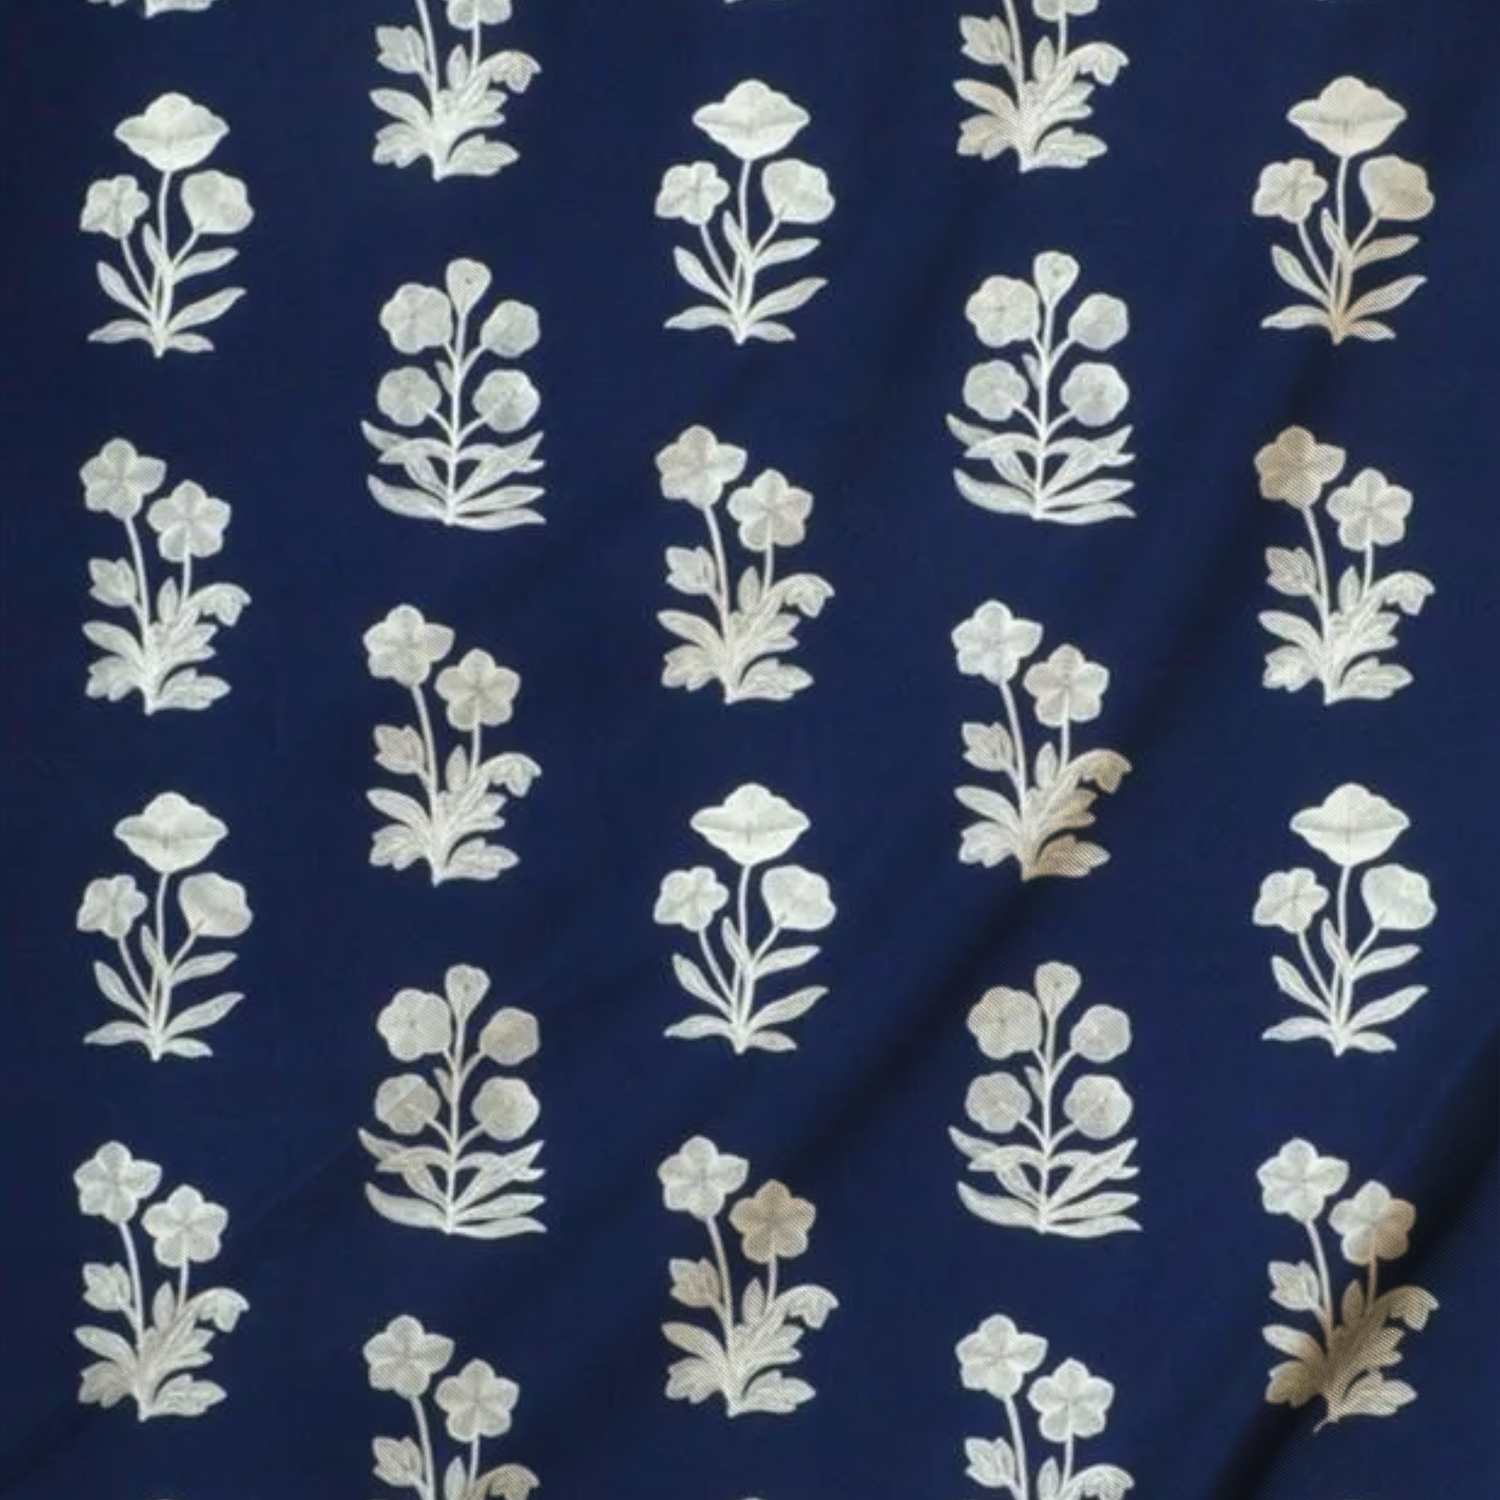 Blue Floral Fabric